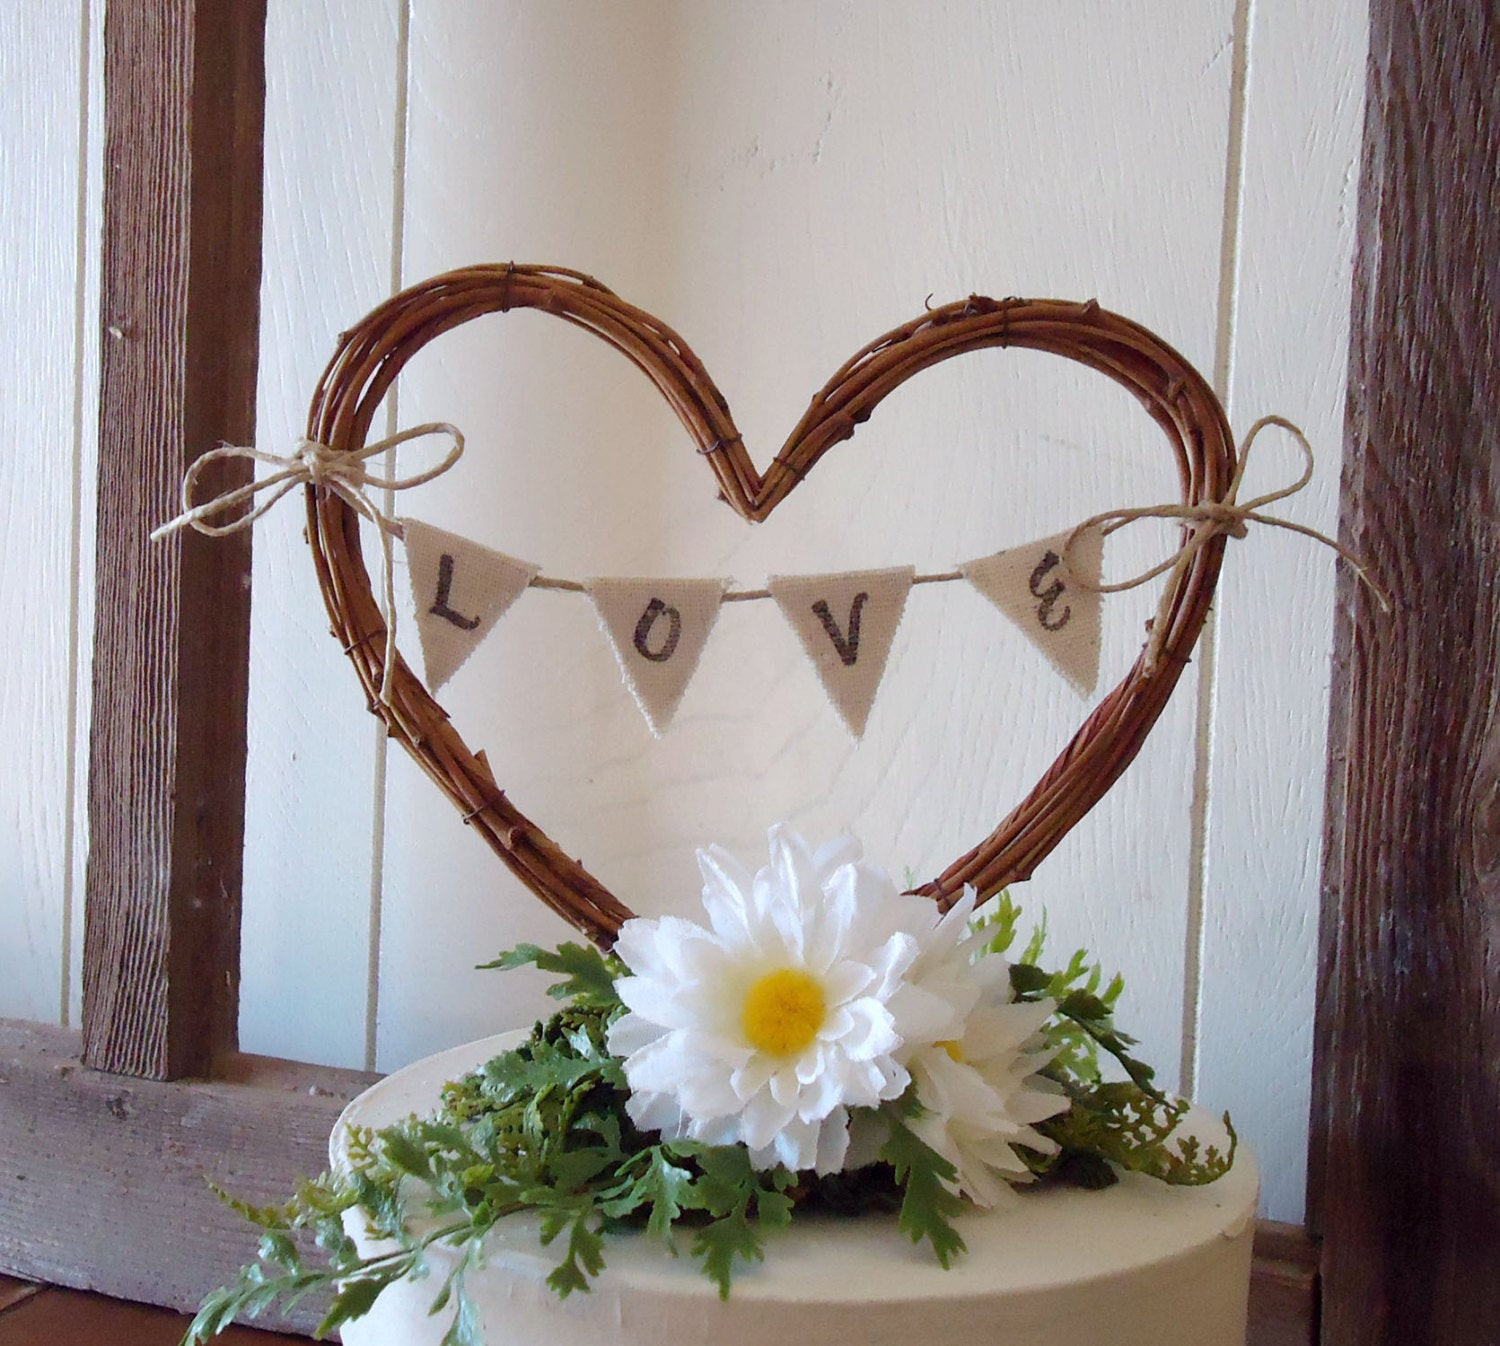 Heart Wedding Cake Toppers
 Wedding Cake Topper Rustic Heart with LOVE by